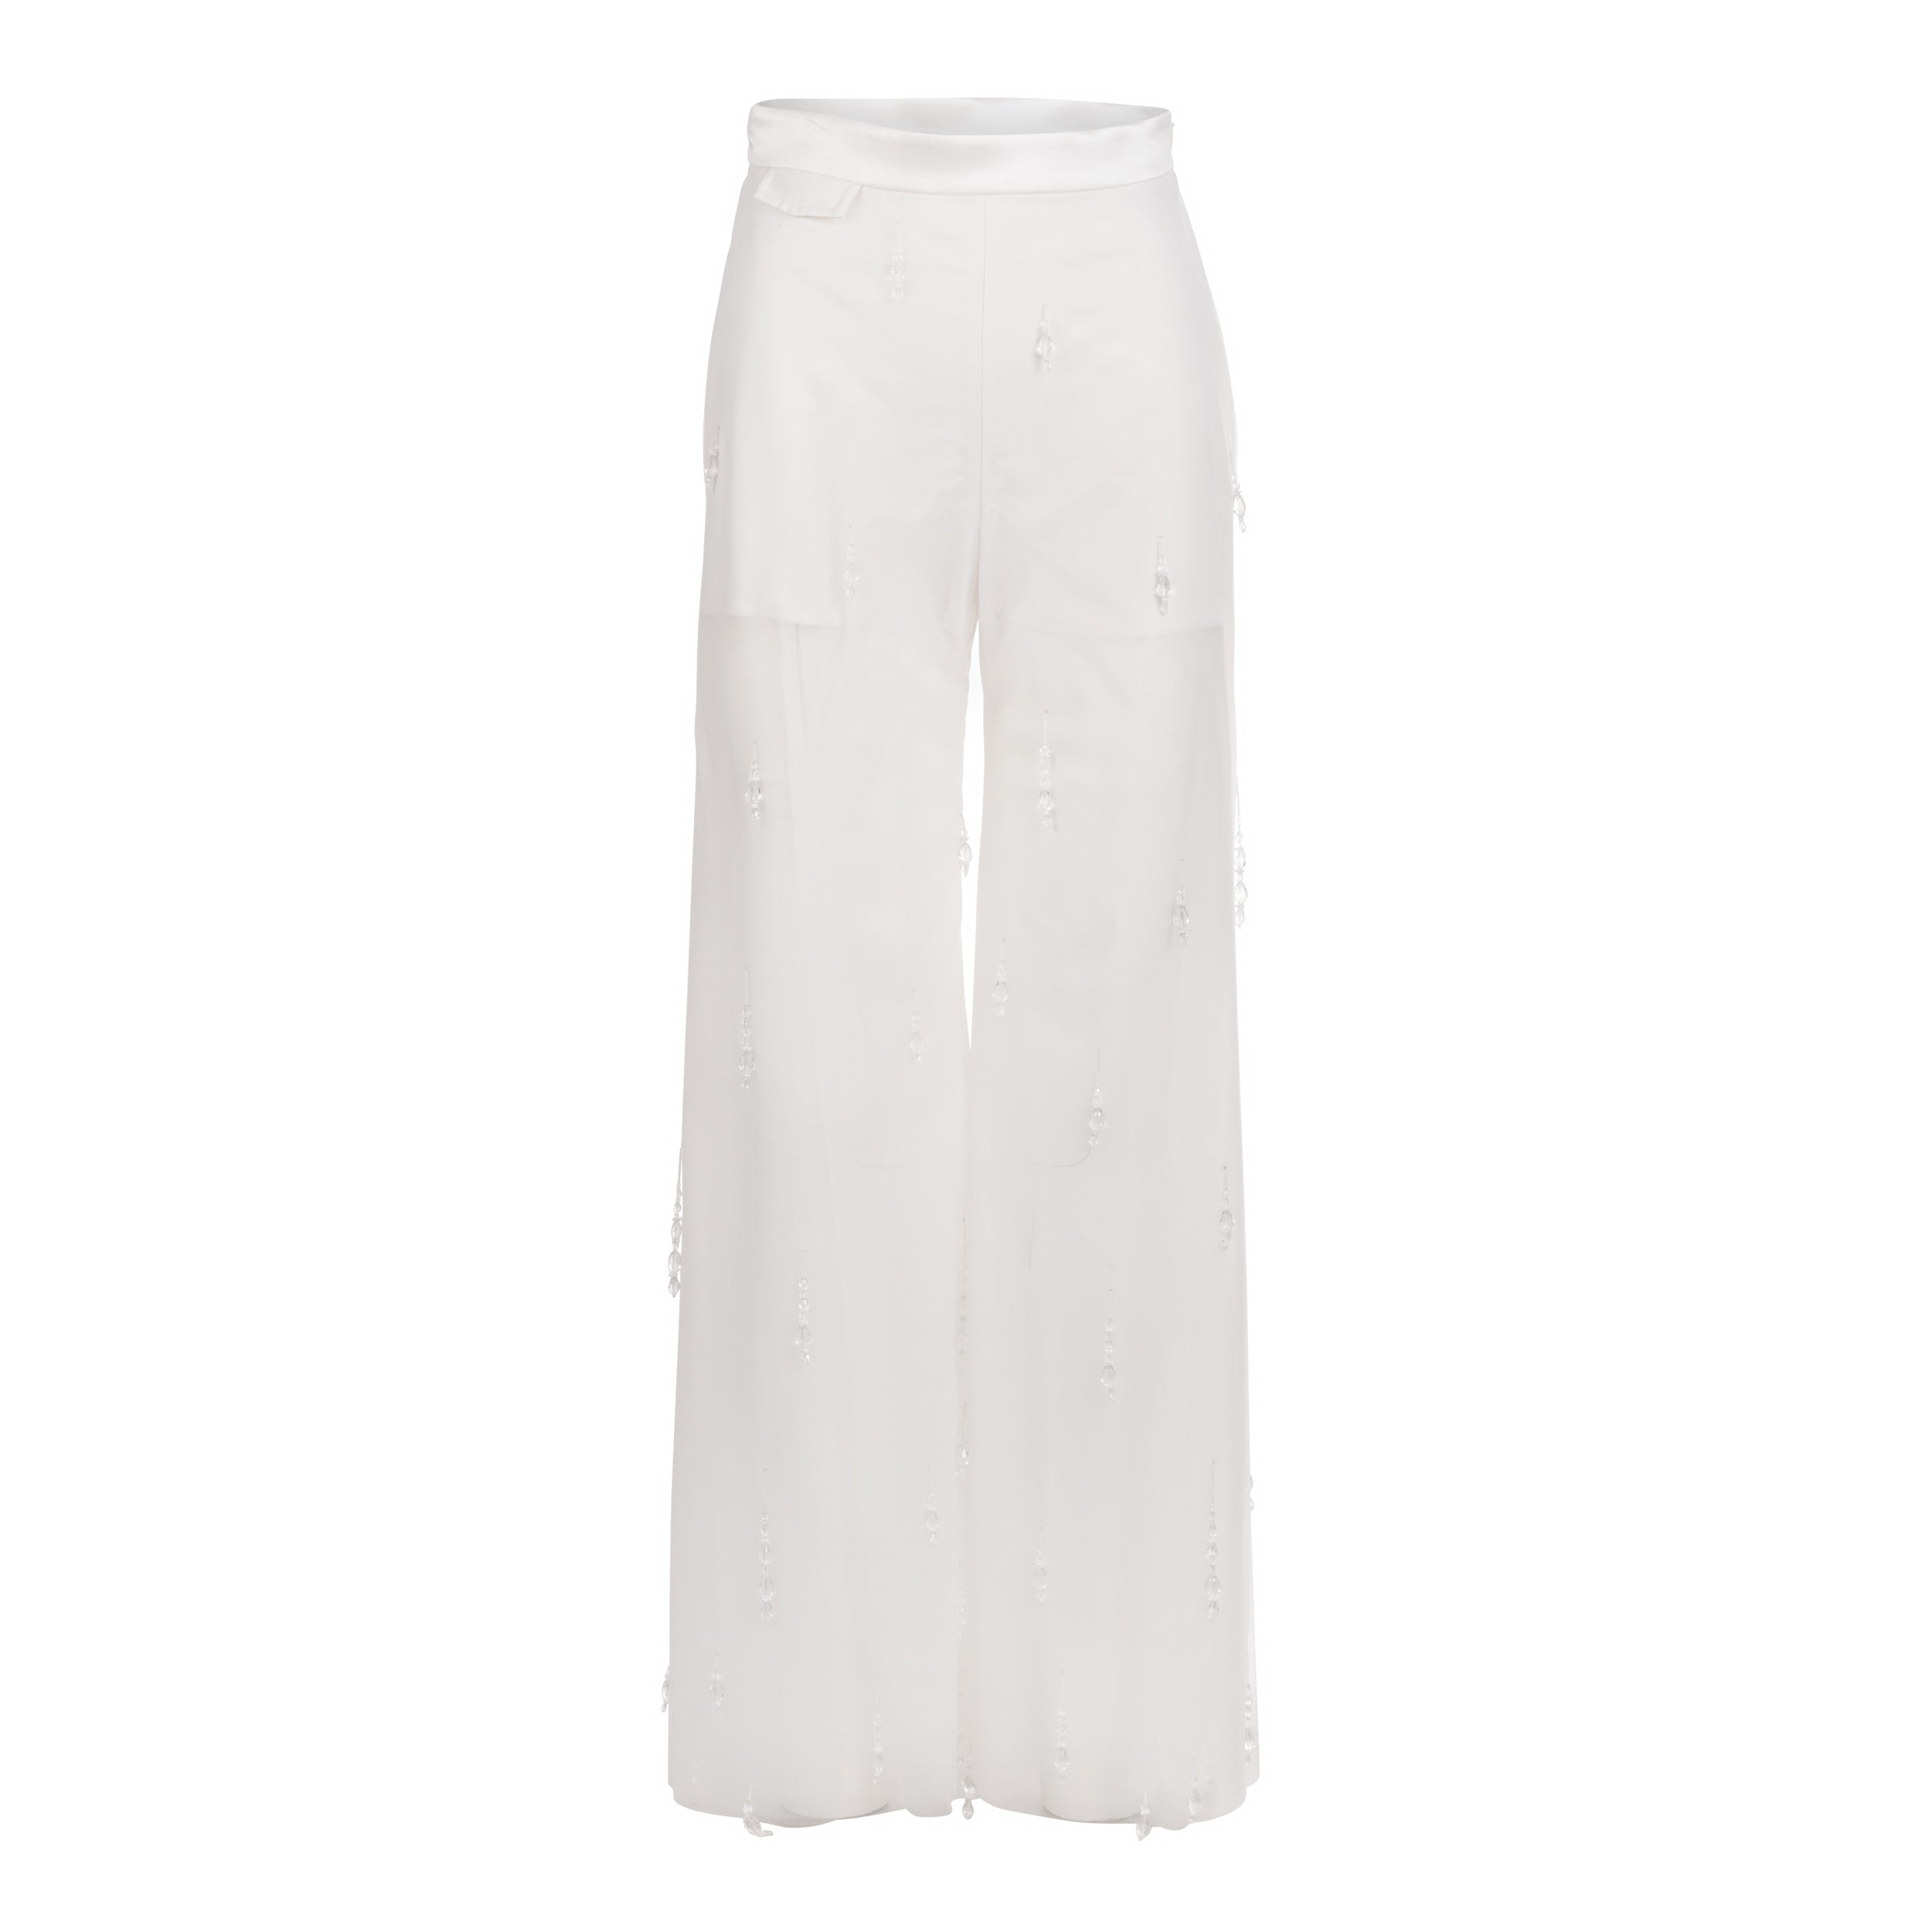 Alexandra Pijut Tulle Trouser in ivory with crystal beading. Wedding suit, bridal, bride, city hall outfit. 